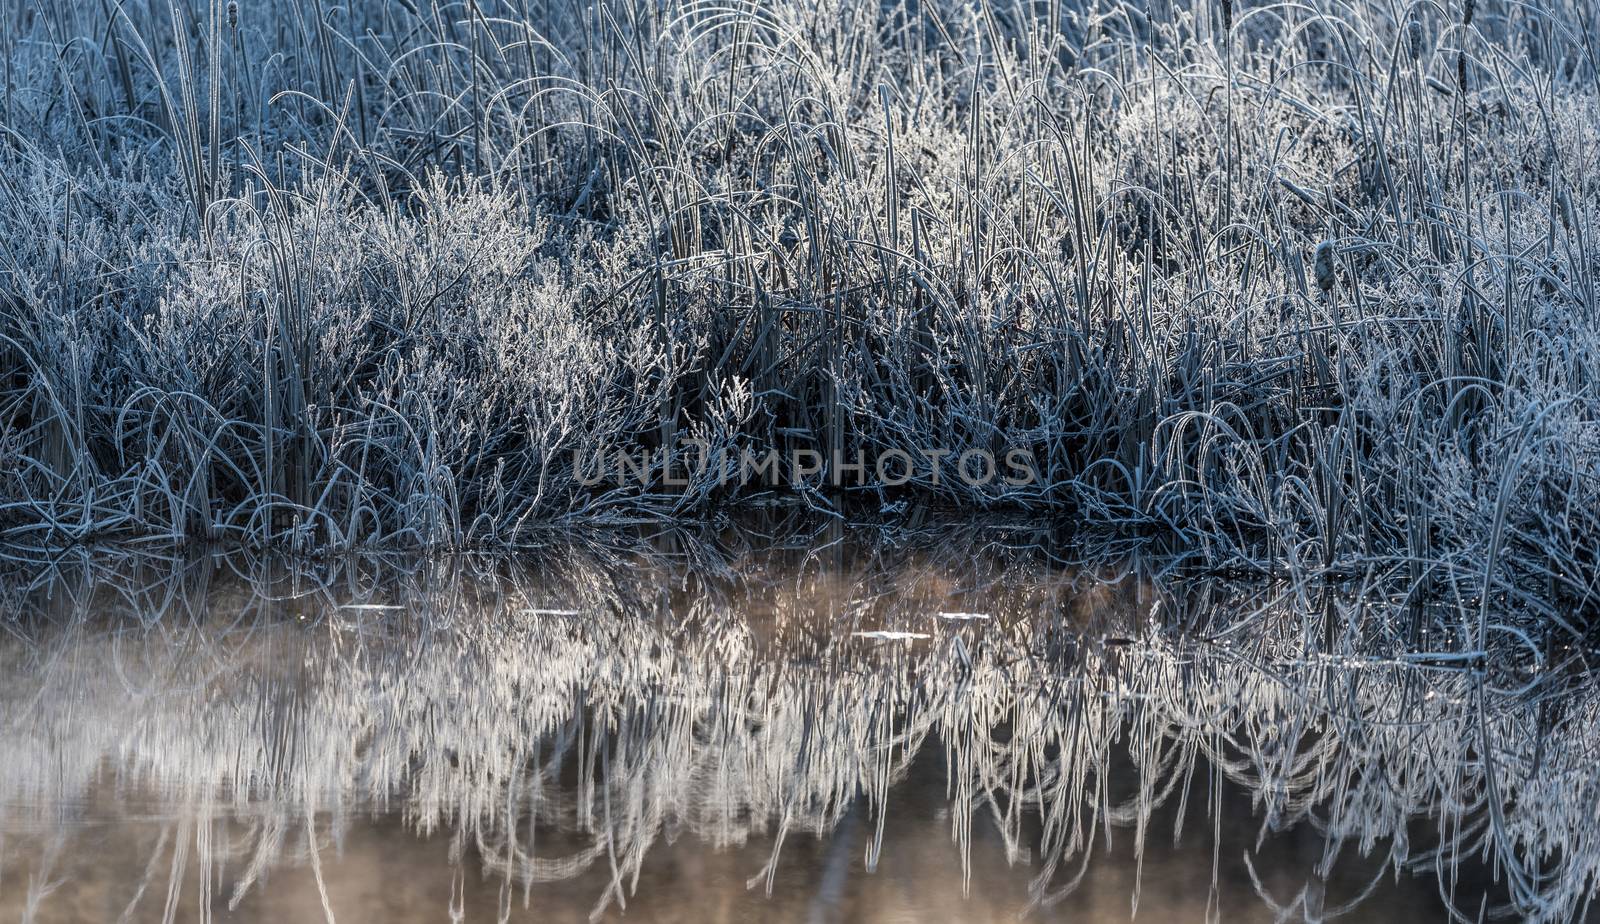 Morning dawn on ice and frost covered wetland foliage.  Encrusted marsh reeds and foliage emit a cool blue light in the early morning sun.